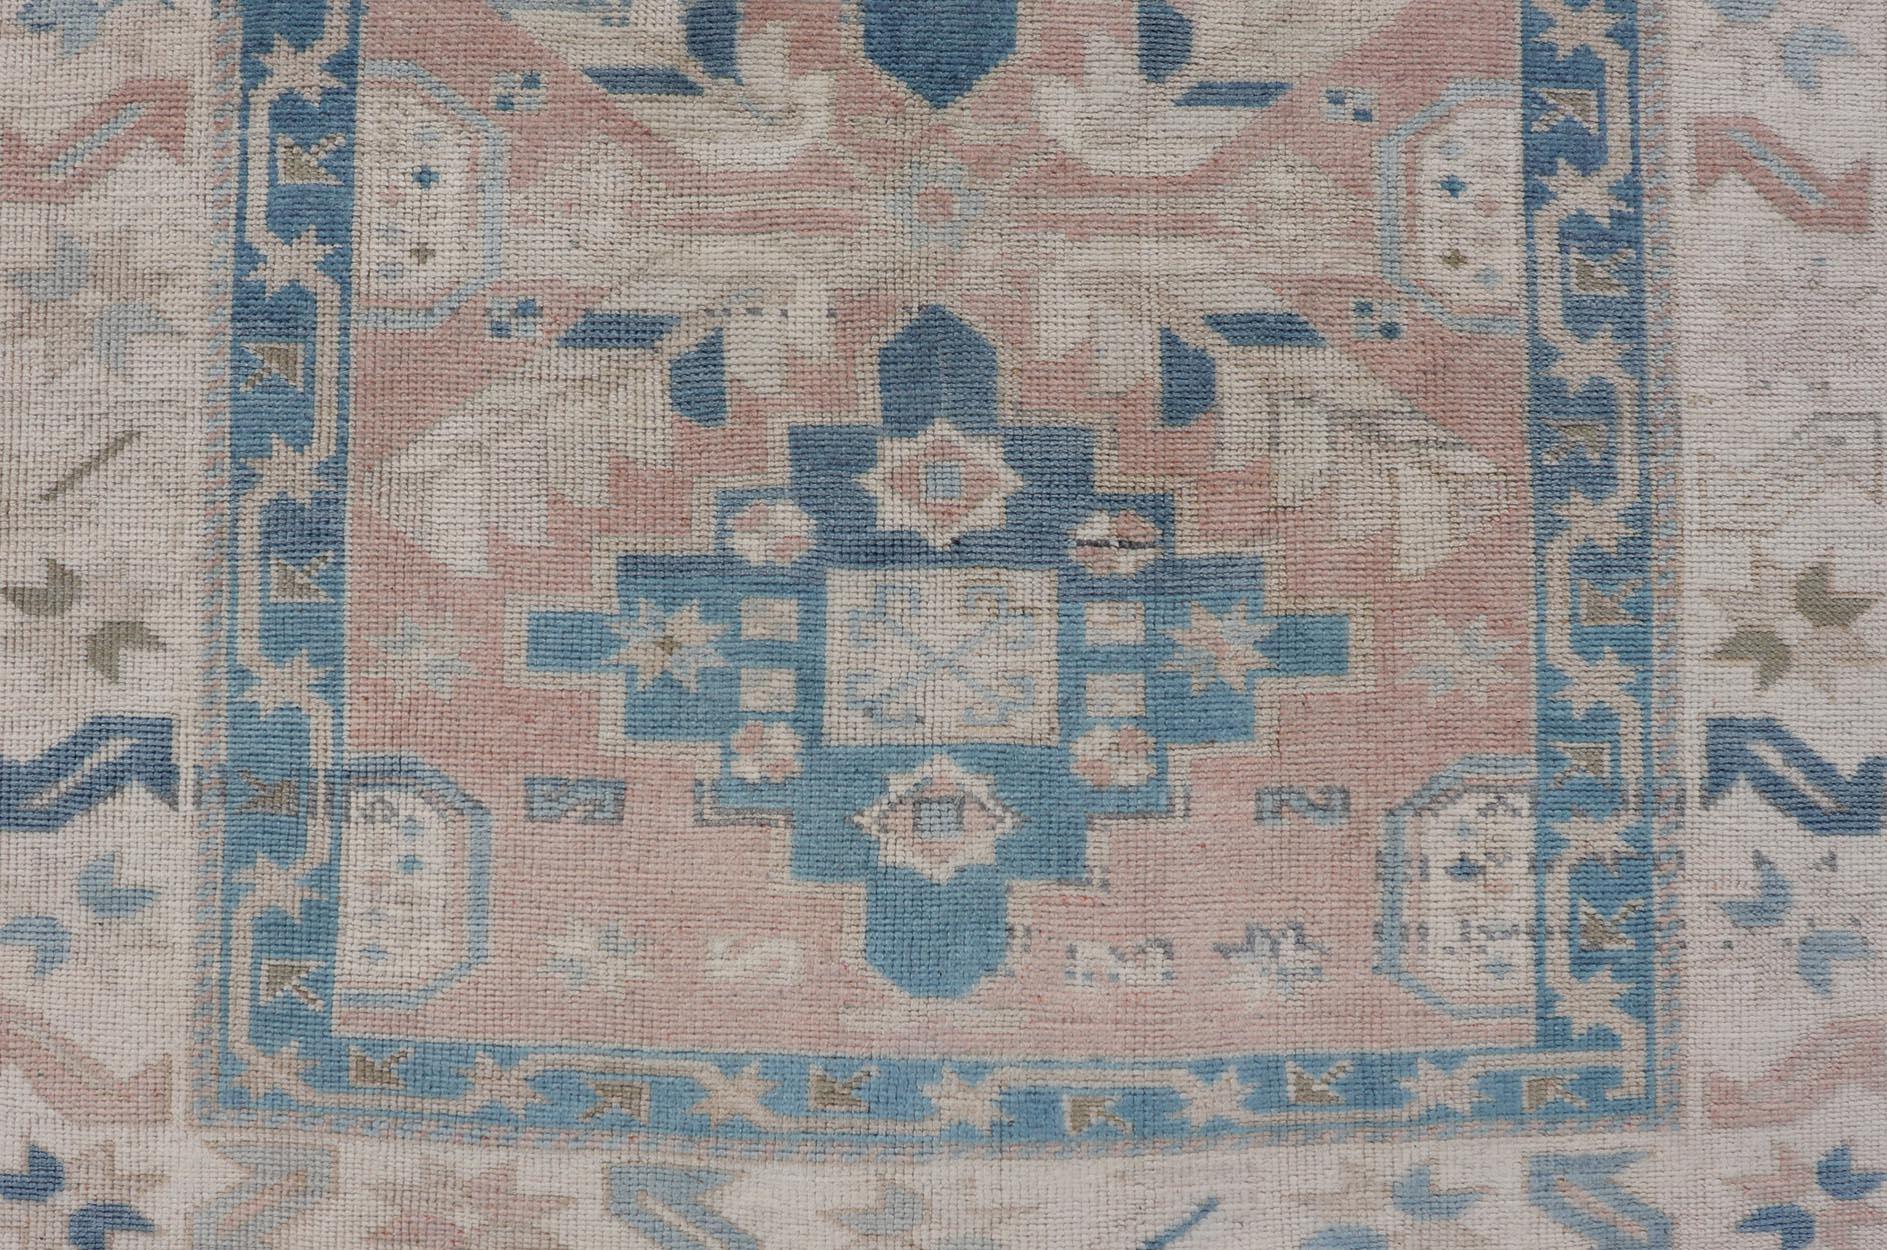 Turkish Oushak Vintage Carpet from Turkey a variety of blue, salmon, beige and natural tones. Rug EN-178331, country of origin / type: Turkey / Oushak, circa 1940

Measures: 4'5 x 6'8 

This vintage Turkish Oushak rug features an intricately